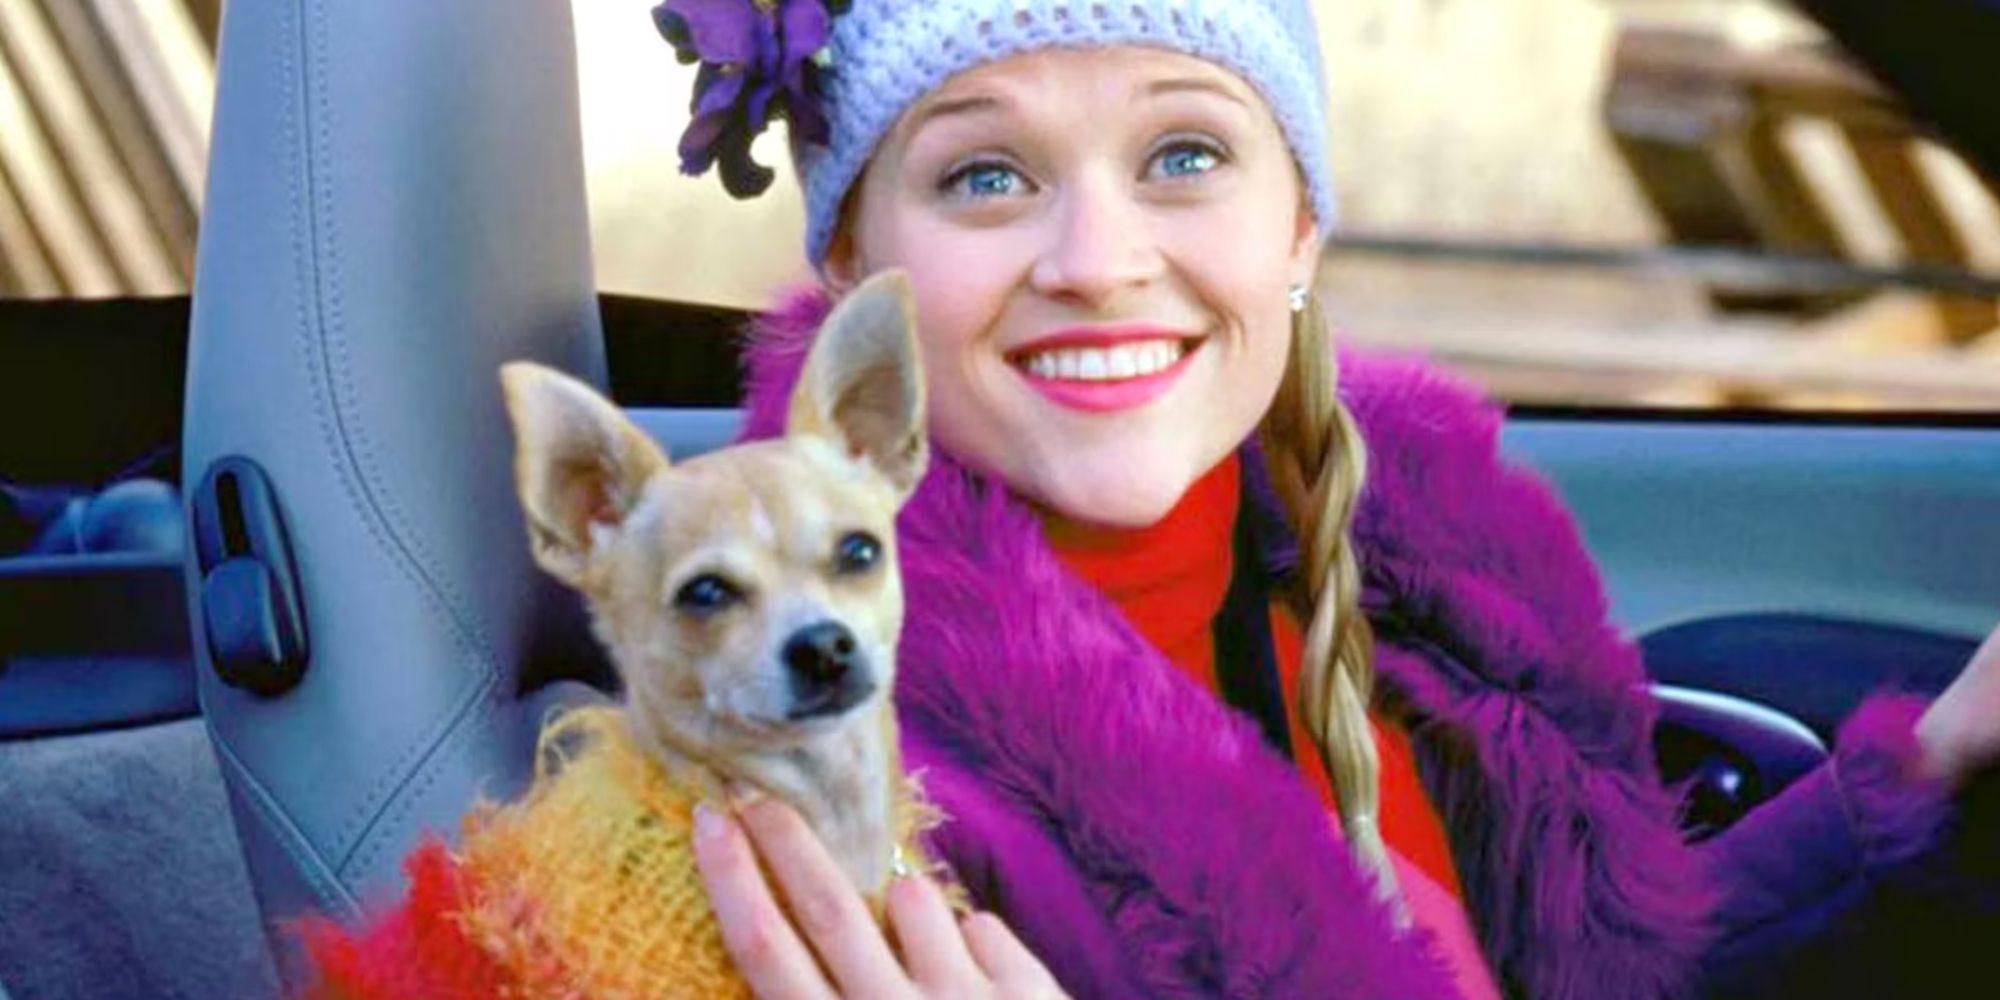 Reese Witherspoon as Elle Woods with Bruiser Woods in a car in Legally Blonde